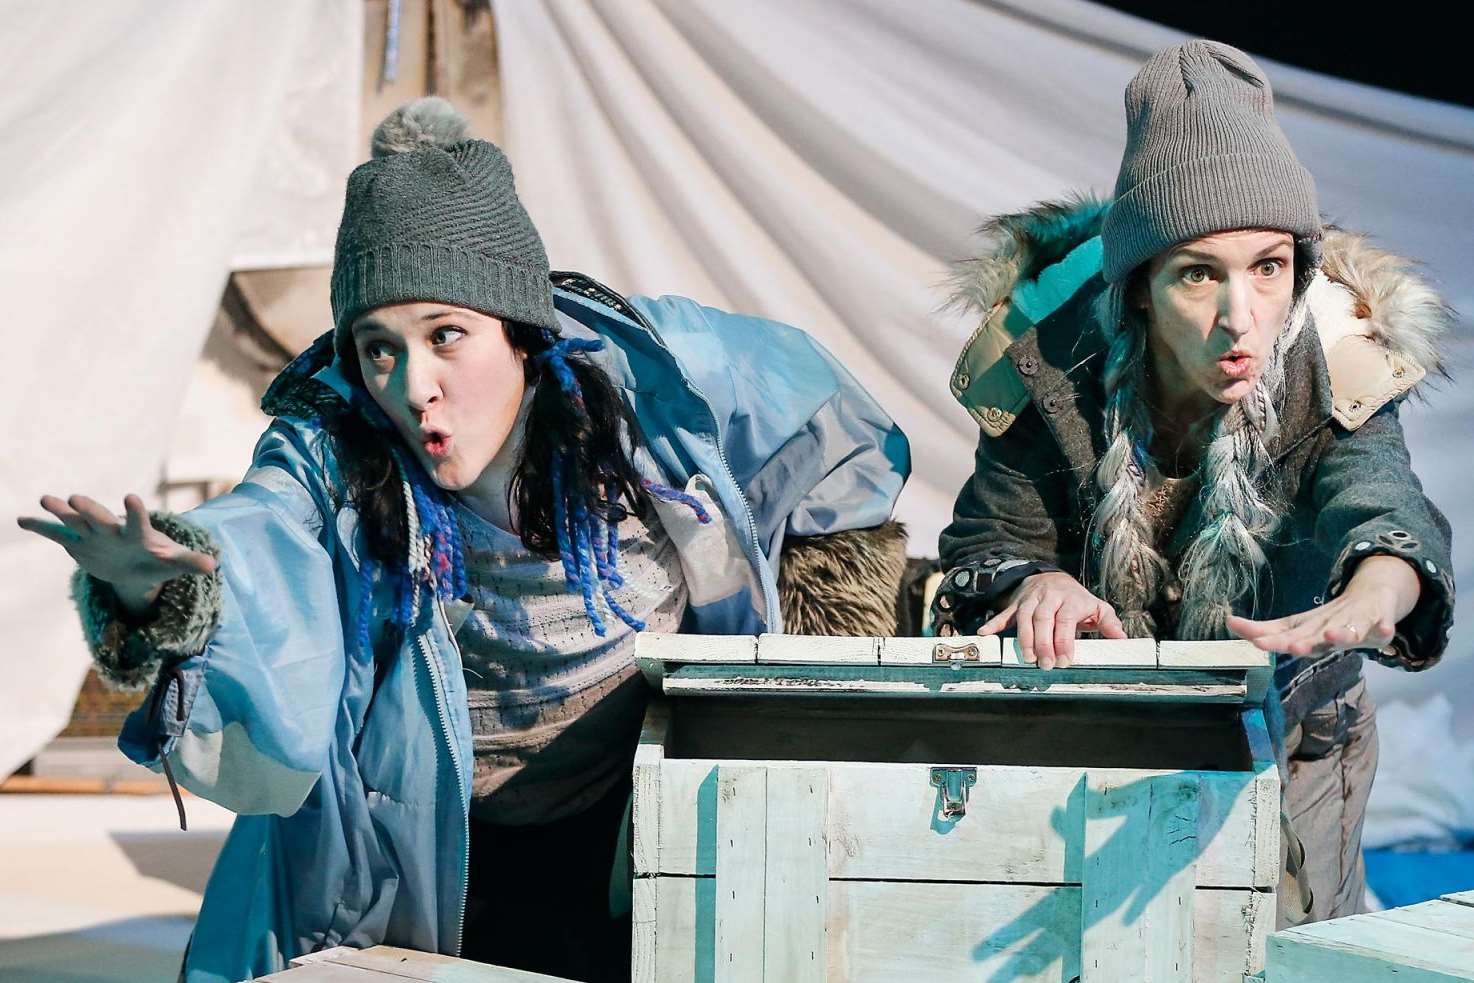 Head off on a magical Arctic adventure on Saturday, March 24 at the Marlowe Theatre